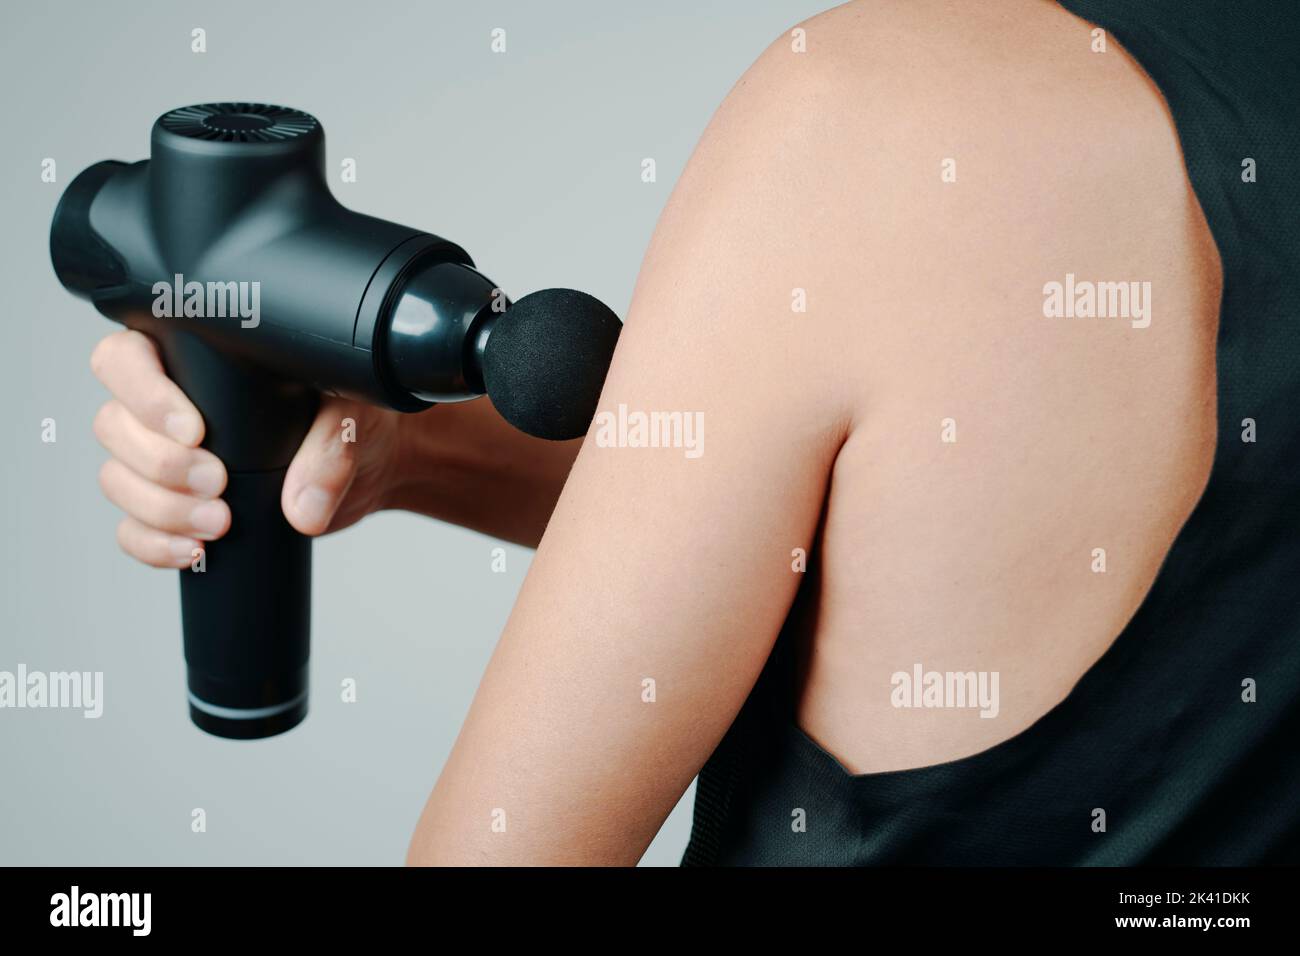 closeup of a young caucasian man, wearing sports clothes, using a massage gun to massage the muscles of his arm Stock Photo